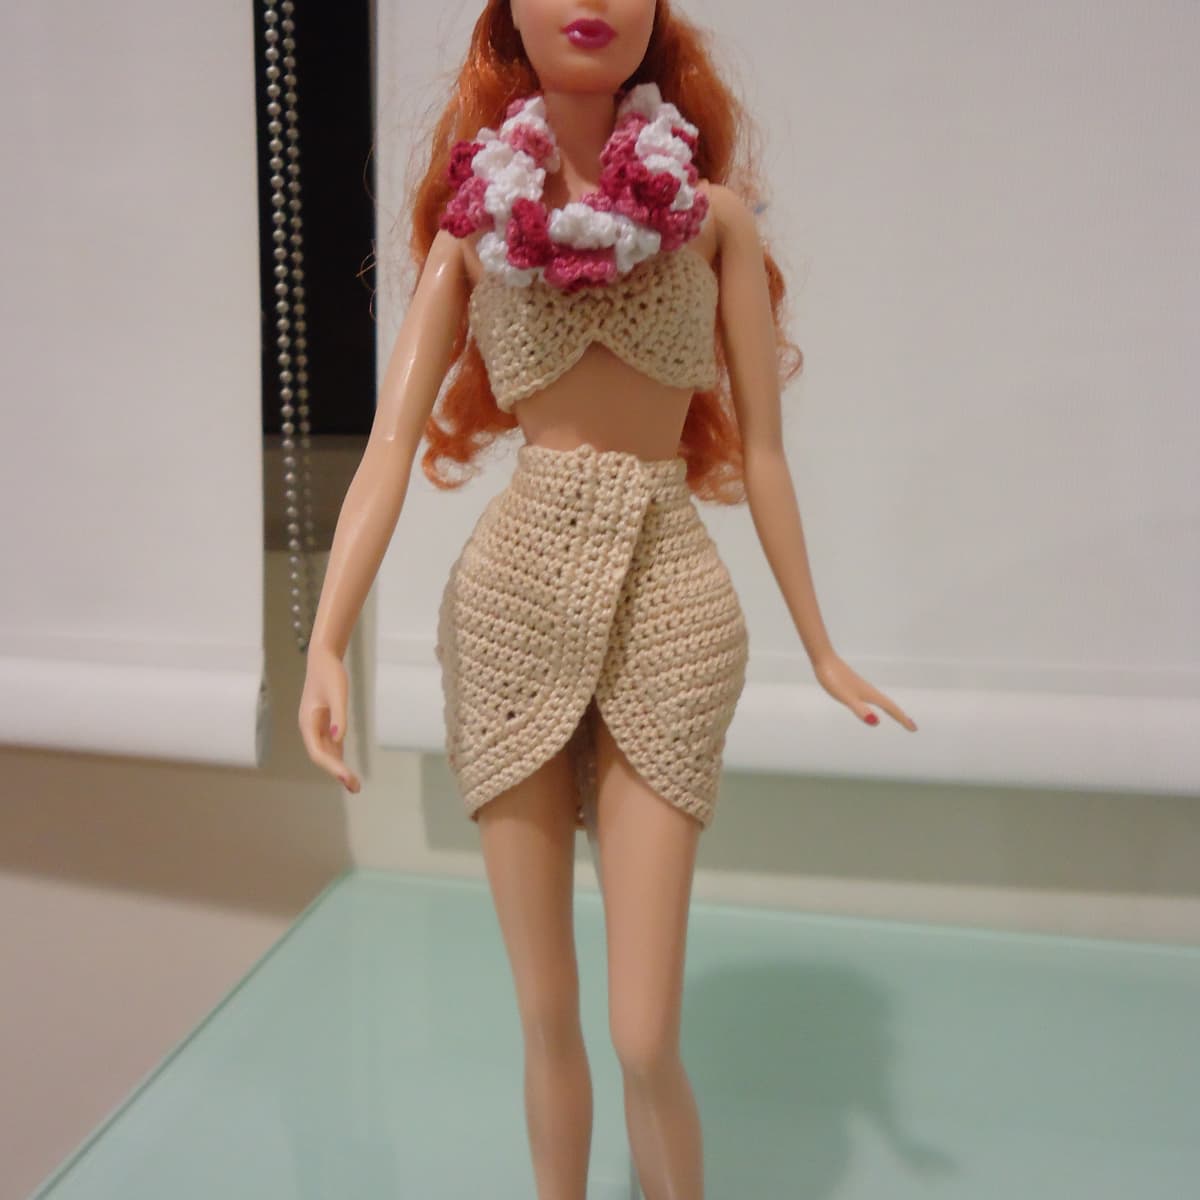 Crochet Clothes for Your Barbie Doll: Tips and Free Patterns - FeltMagnet